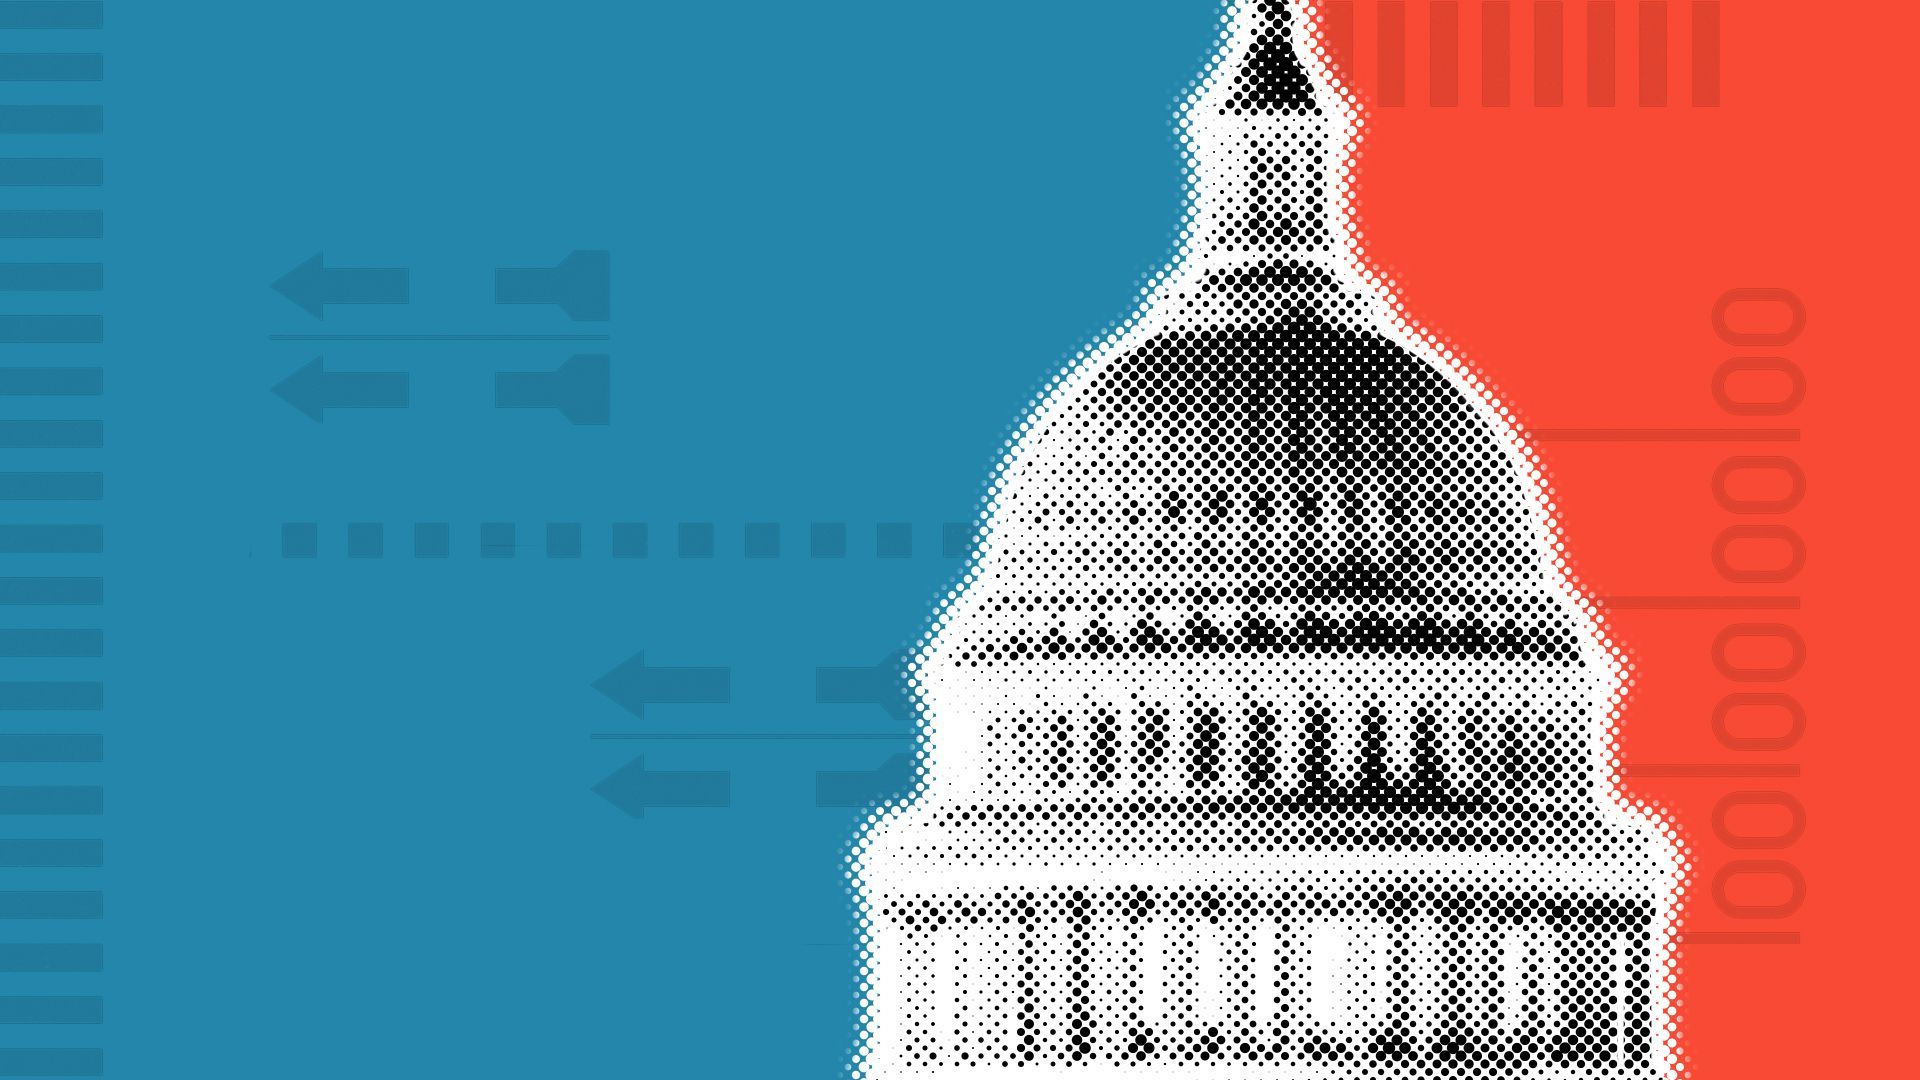 Illustration of the U.S. Capitol over a divided blue and red background with elements of ballots.